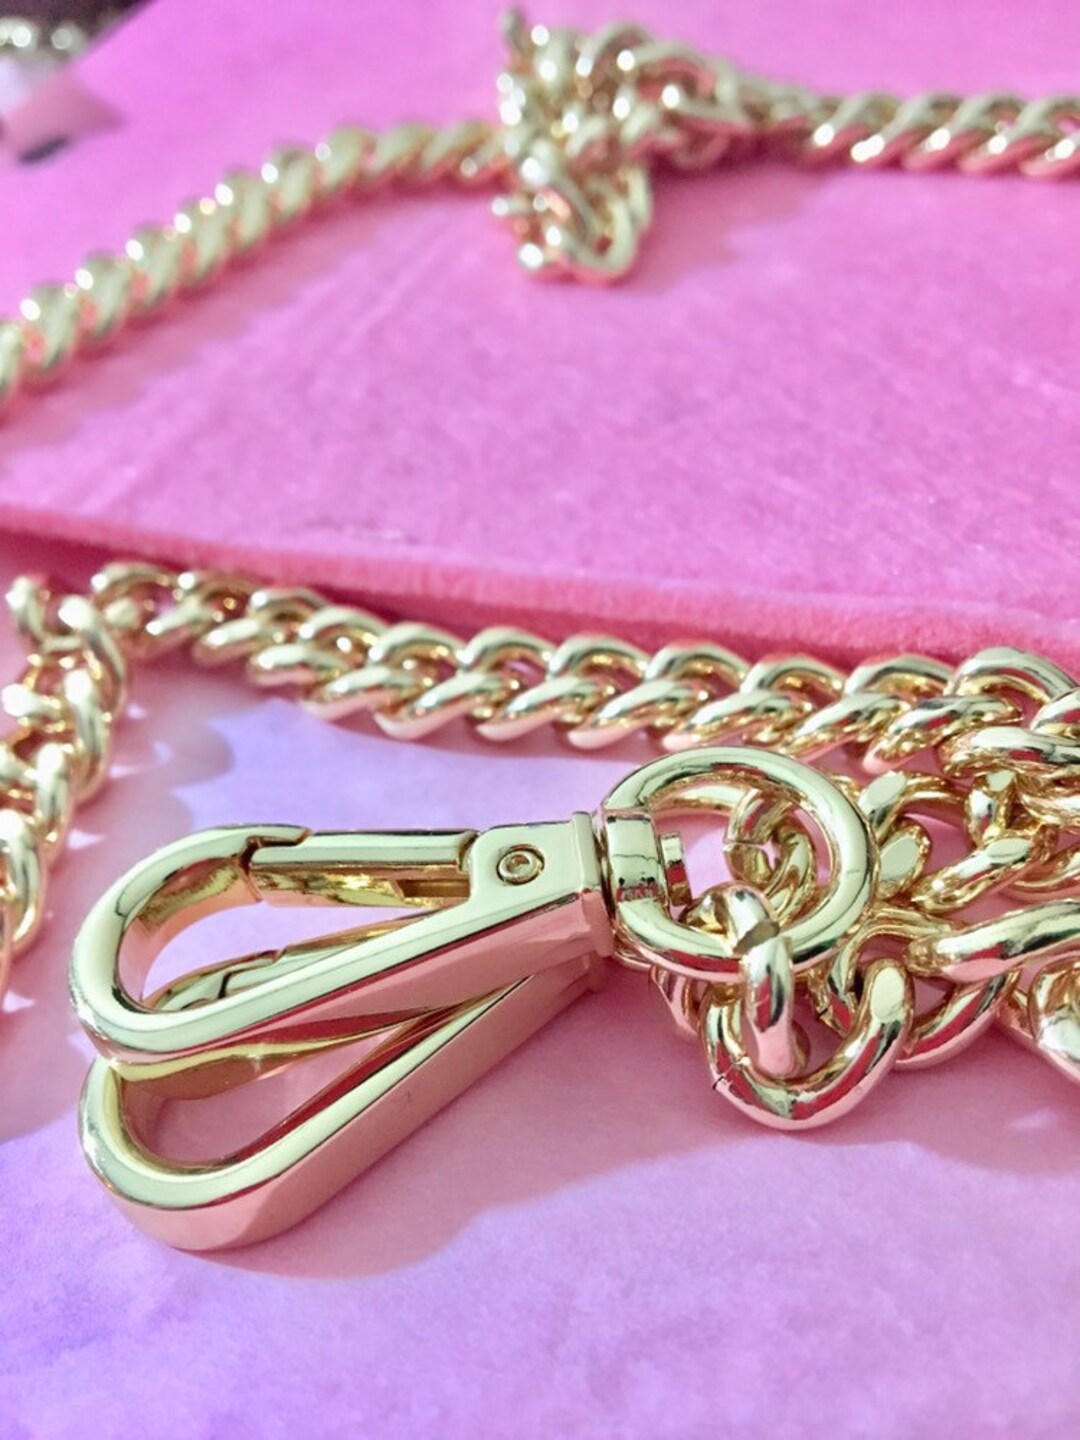 Purse Chain Large Gold Curb 10mm Width Strap EXTENDER for 